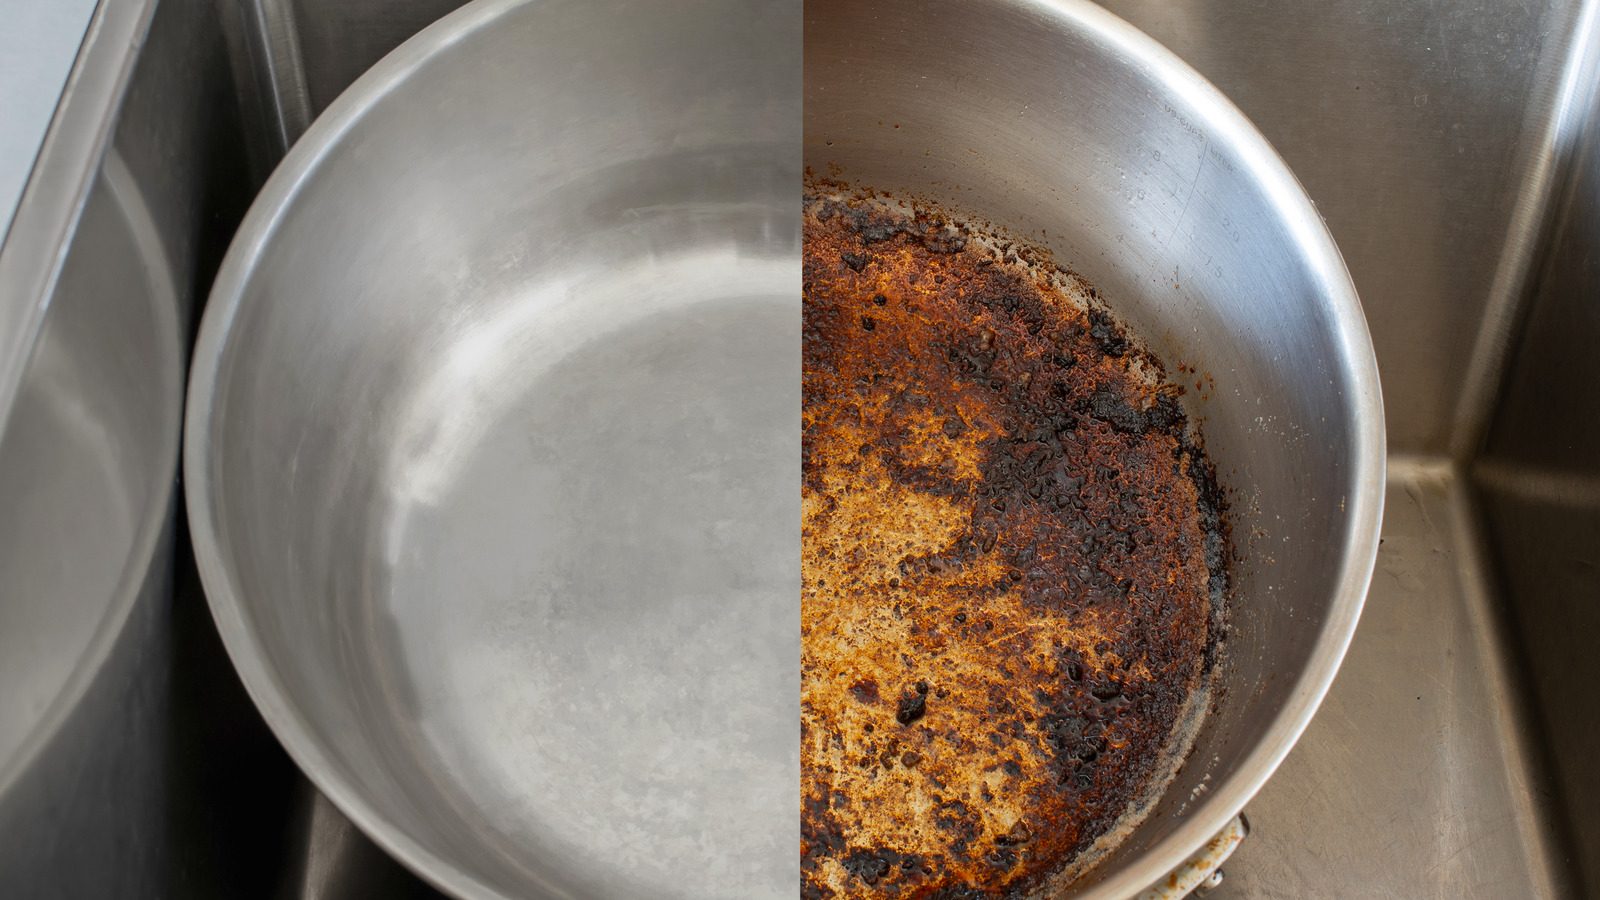 How to Clean Your Stainless Steel Pans, According to a Pro